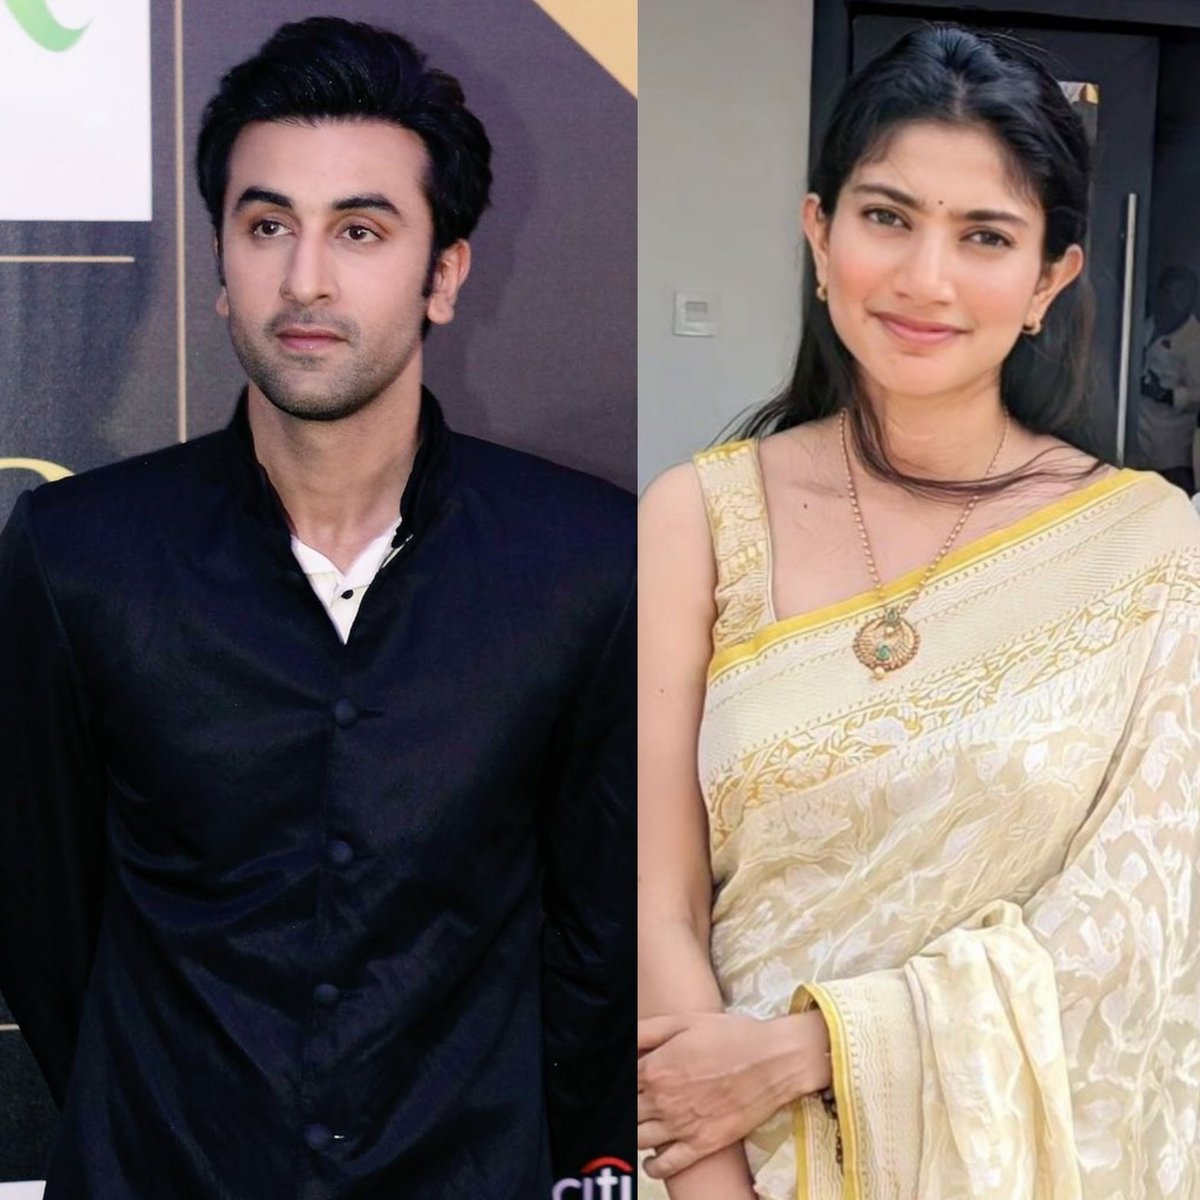 Happy birthday @Sai_Pallavi92 May your be filled with joy, love, and unforgettable moments. ♥️✨️ Can't wait to see You and Rk As shree Ram and Sita in #Ramayana 🙌 #RanbirKapoor #SaiPallavi